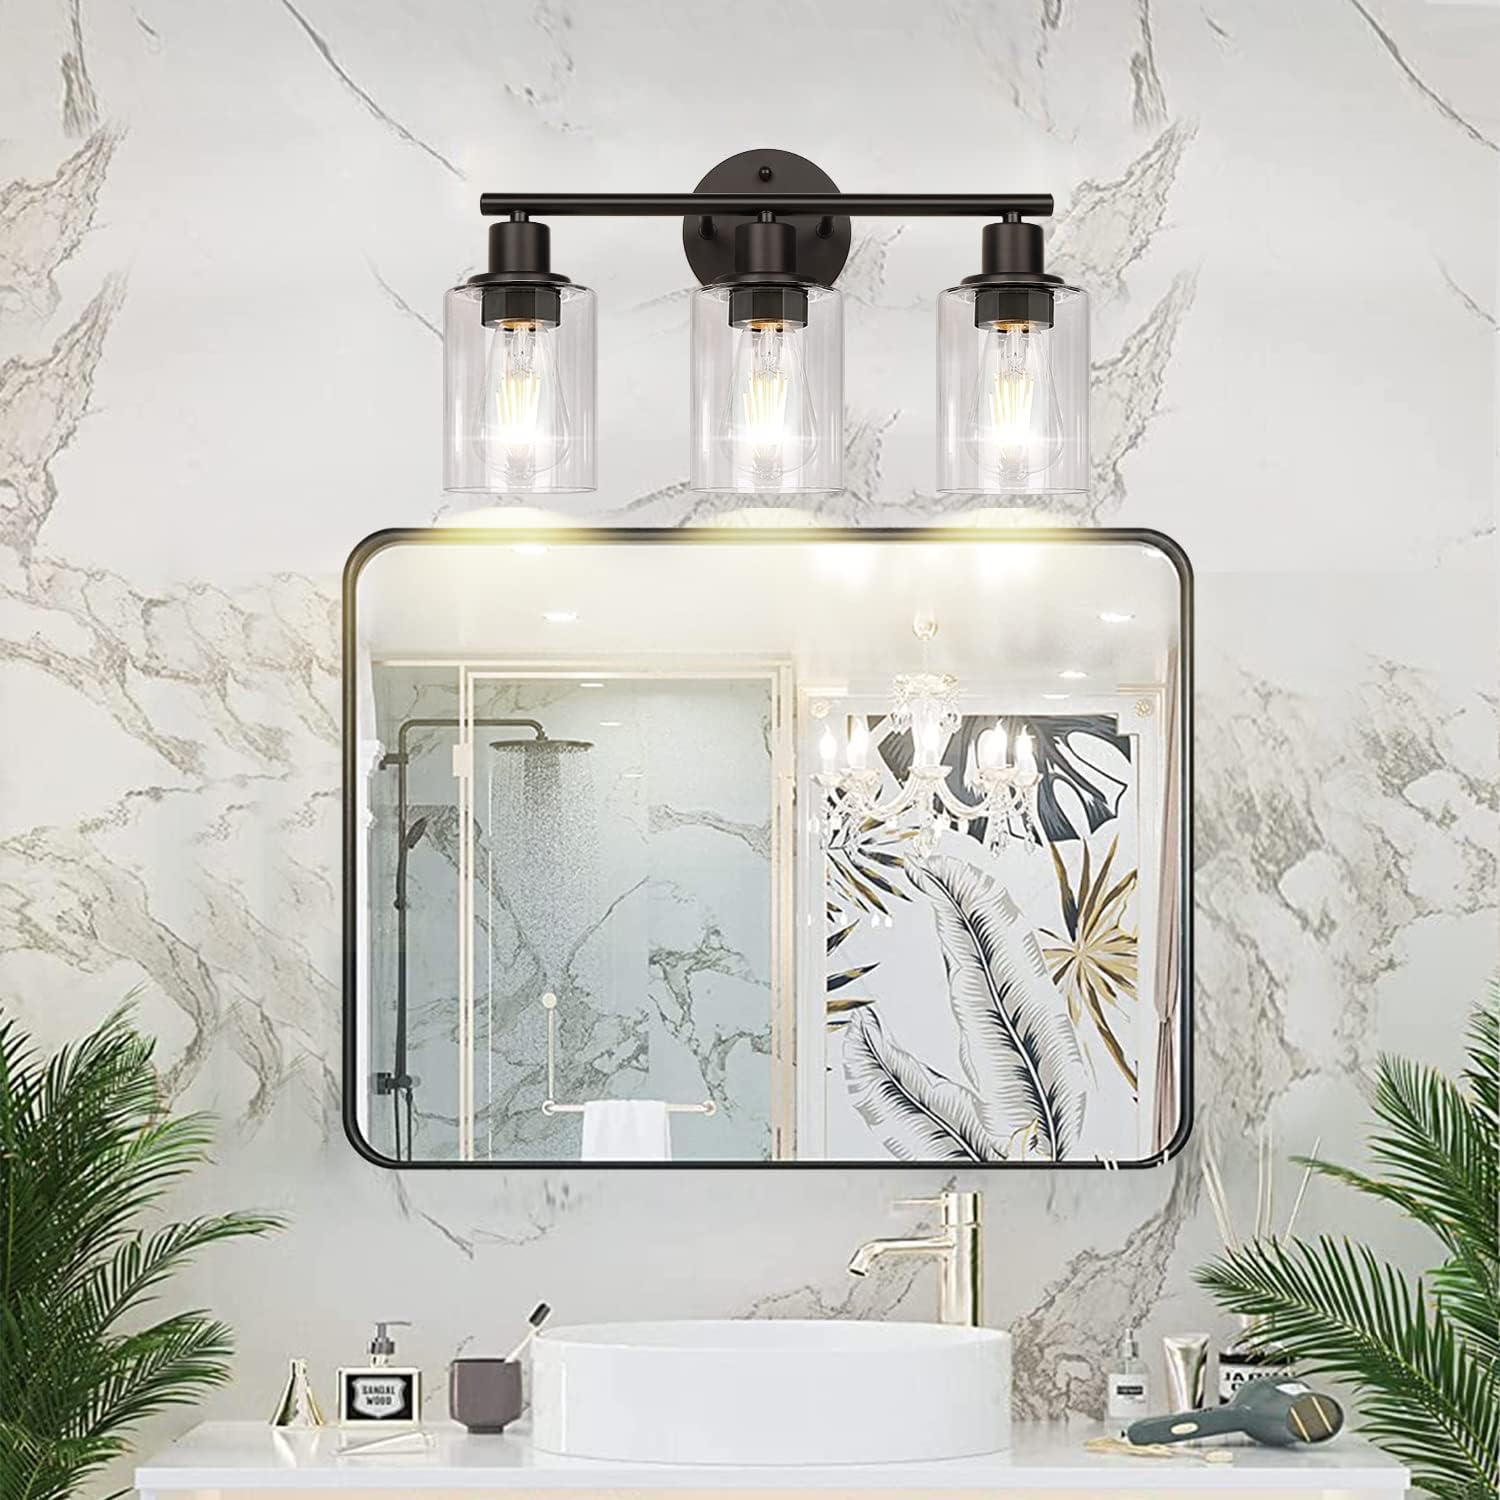 What Is A Vanity Light